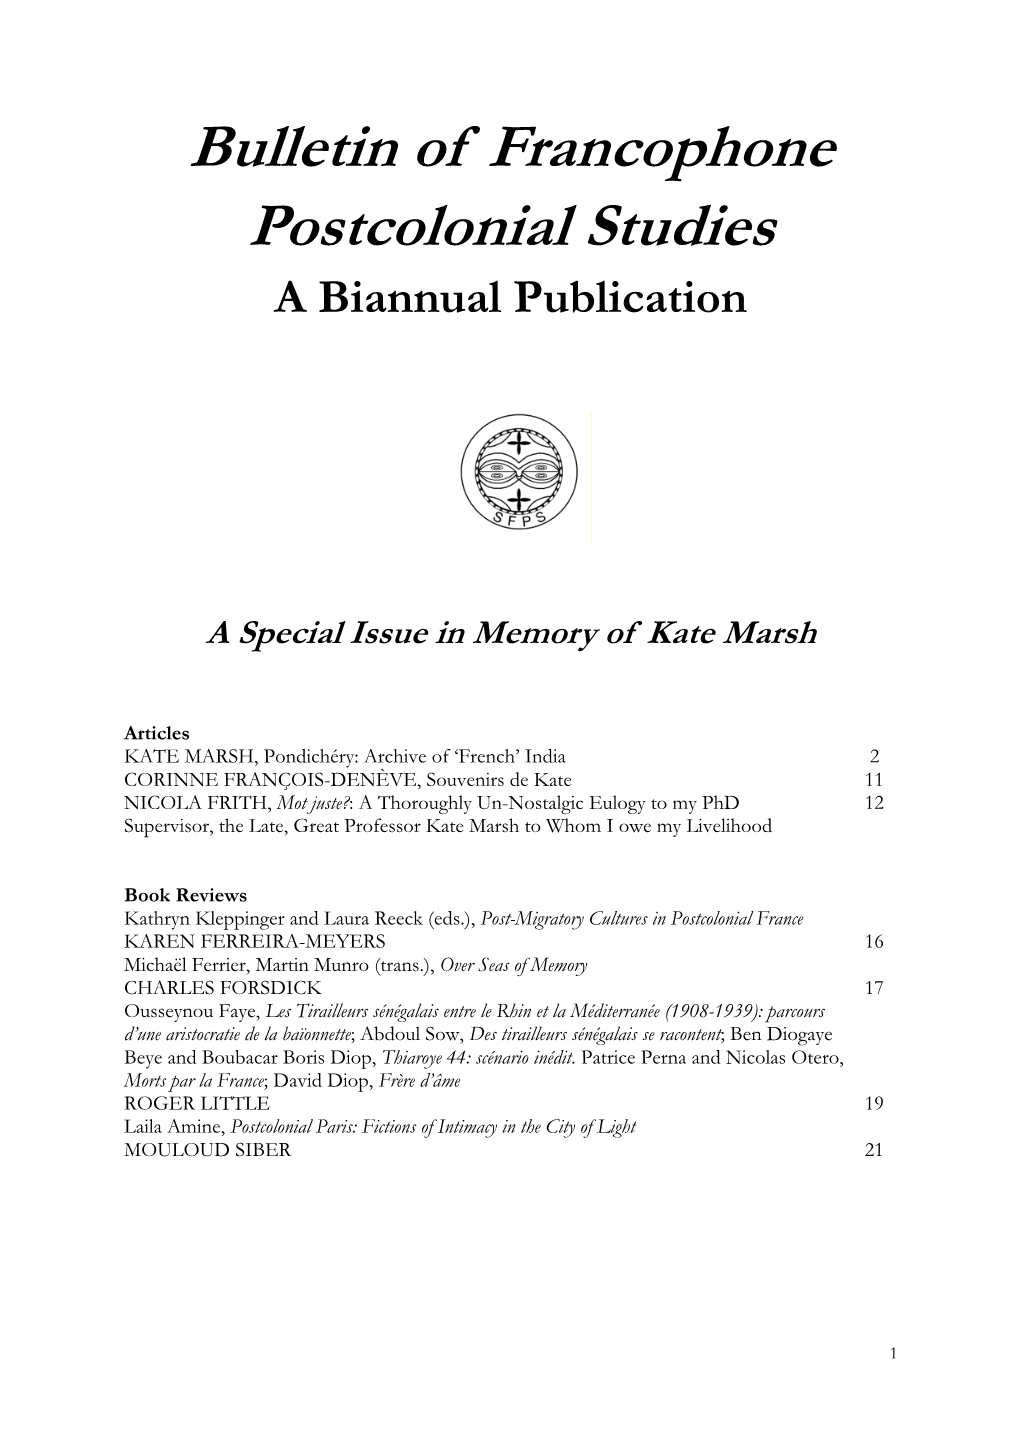 Special Issue in Memory of Kate Marsh (2019)